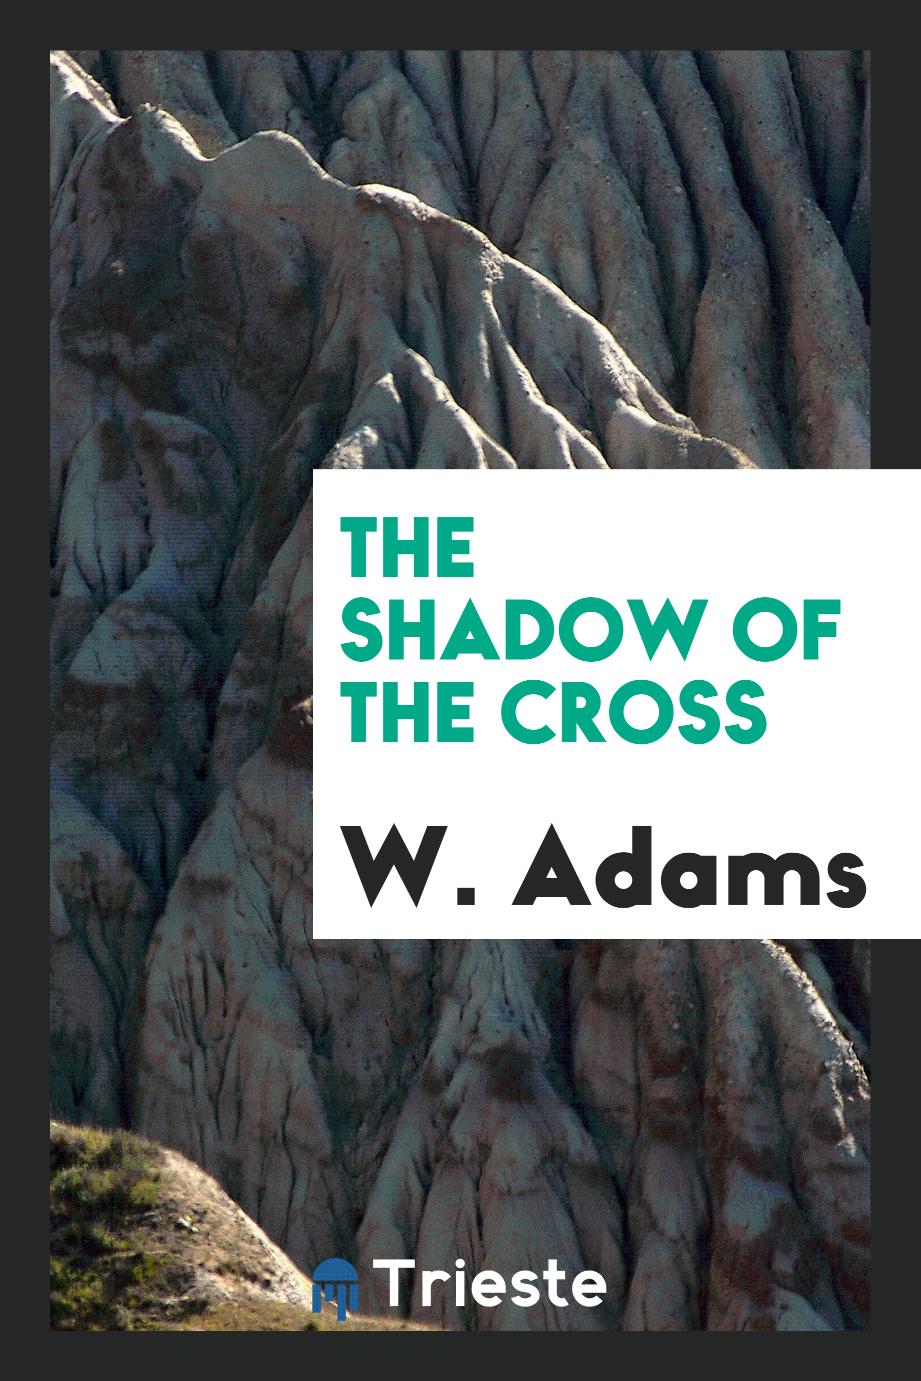 The shadow of the cross